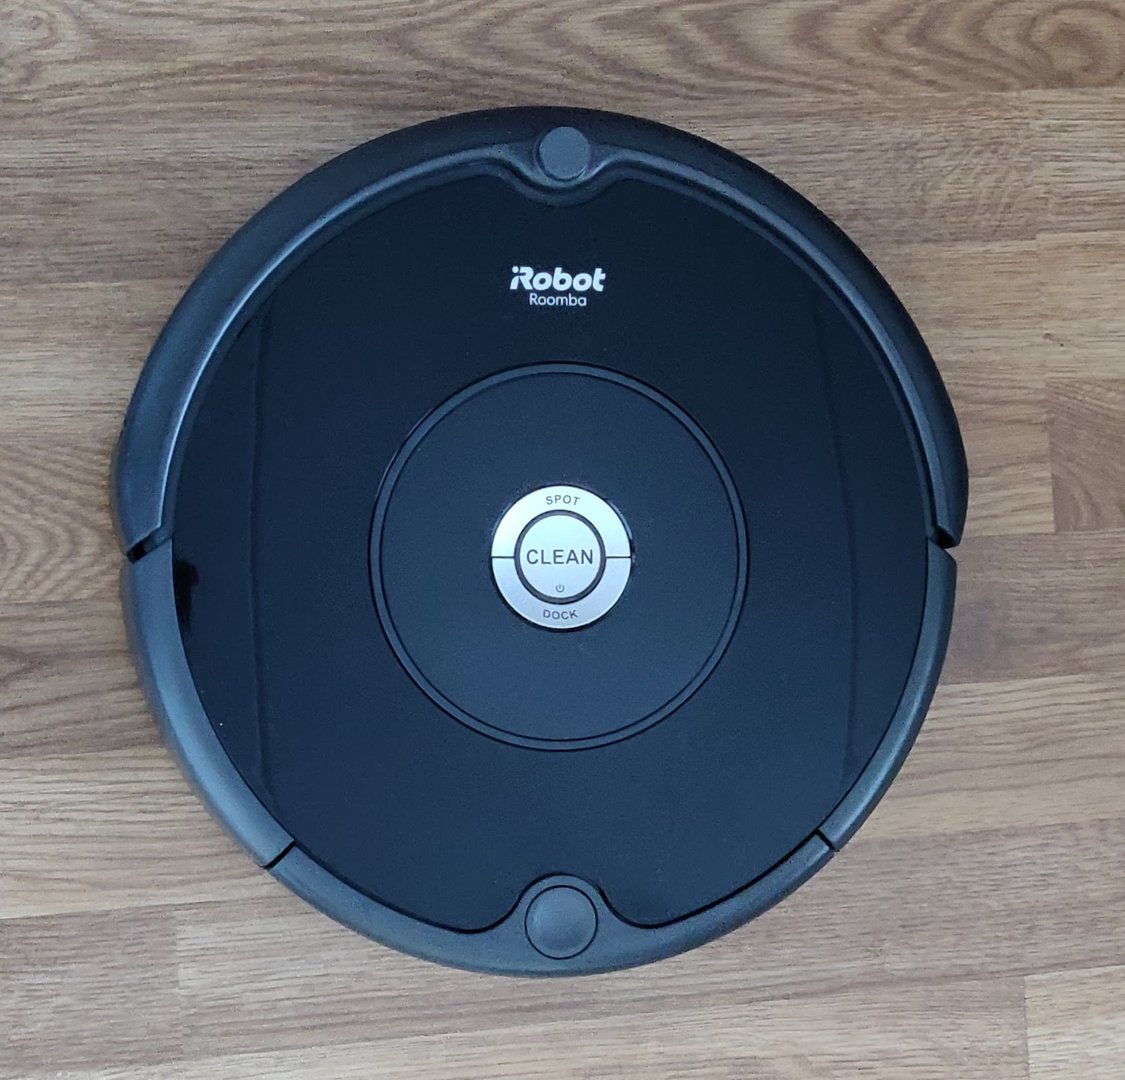 Reproducere Nogen som helst Trives Roomba 605 review - Can a cheap robot vacuum be good? - AfterDawn